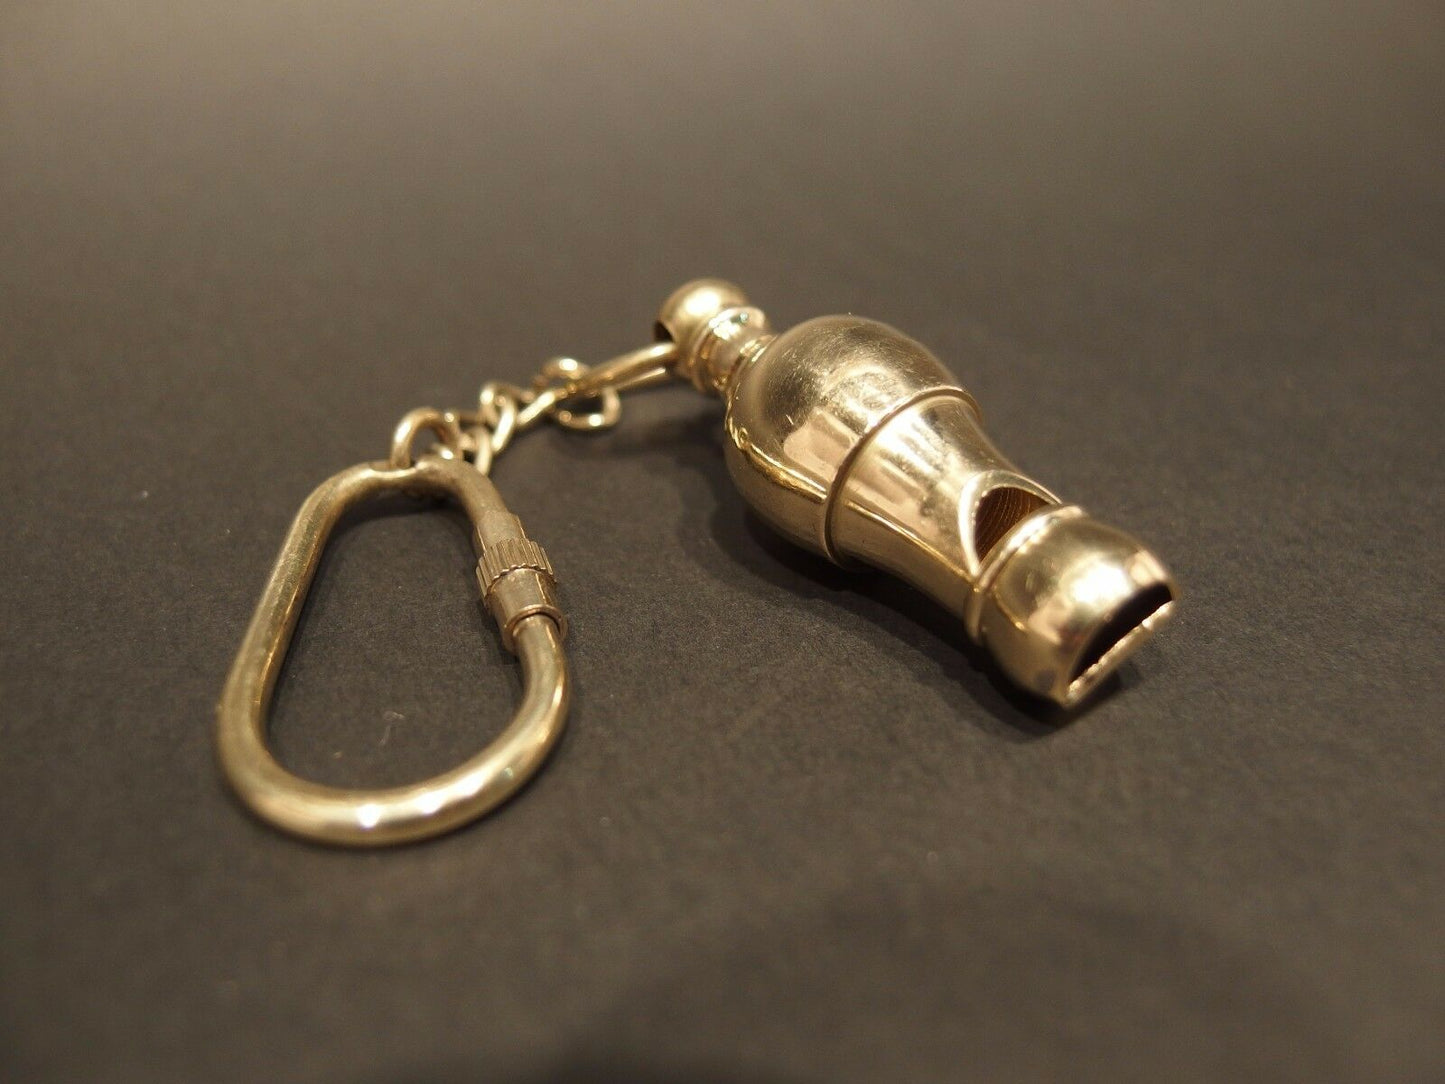 Brass Pear Shape Whistle Pendant Key chain Vintage Antique Victorian Style - Early Home Decor